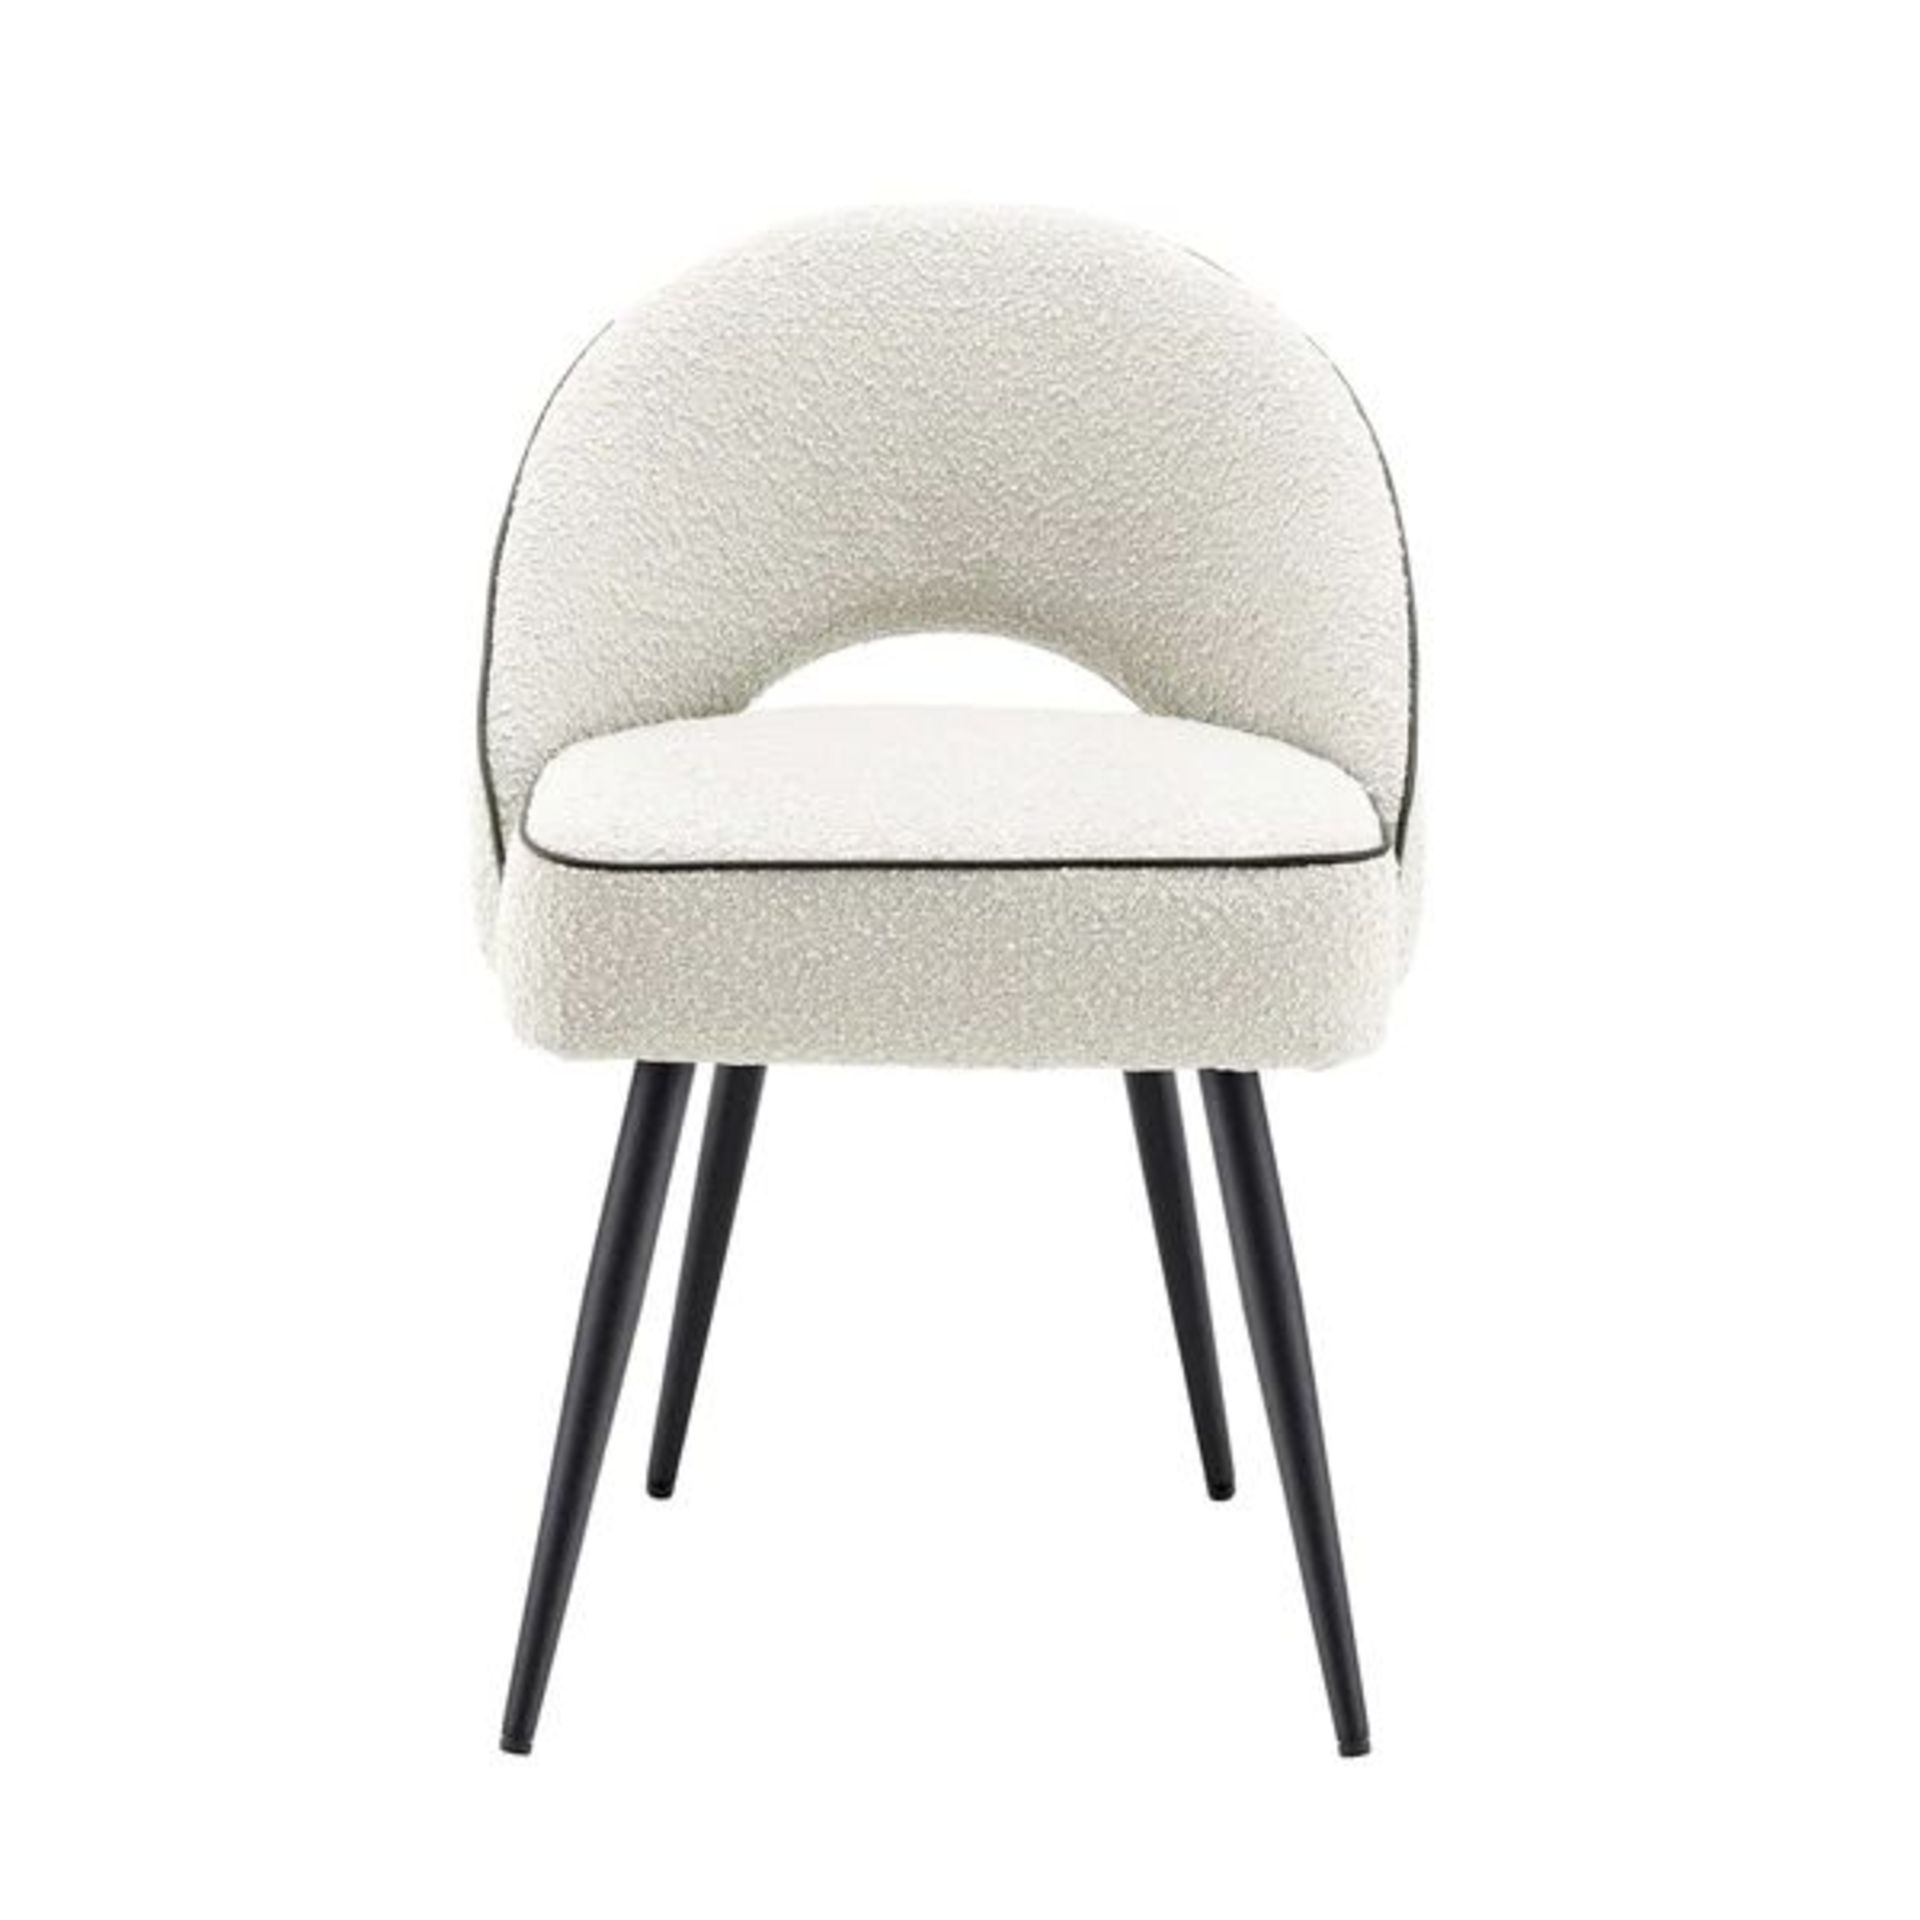 Oakley Set of 2 White Boucle Upholstered Dining Chairs with Piping. - R14. RRP £269.99. Our - Image 2 of 2